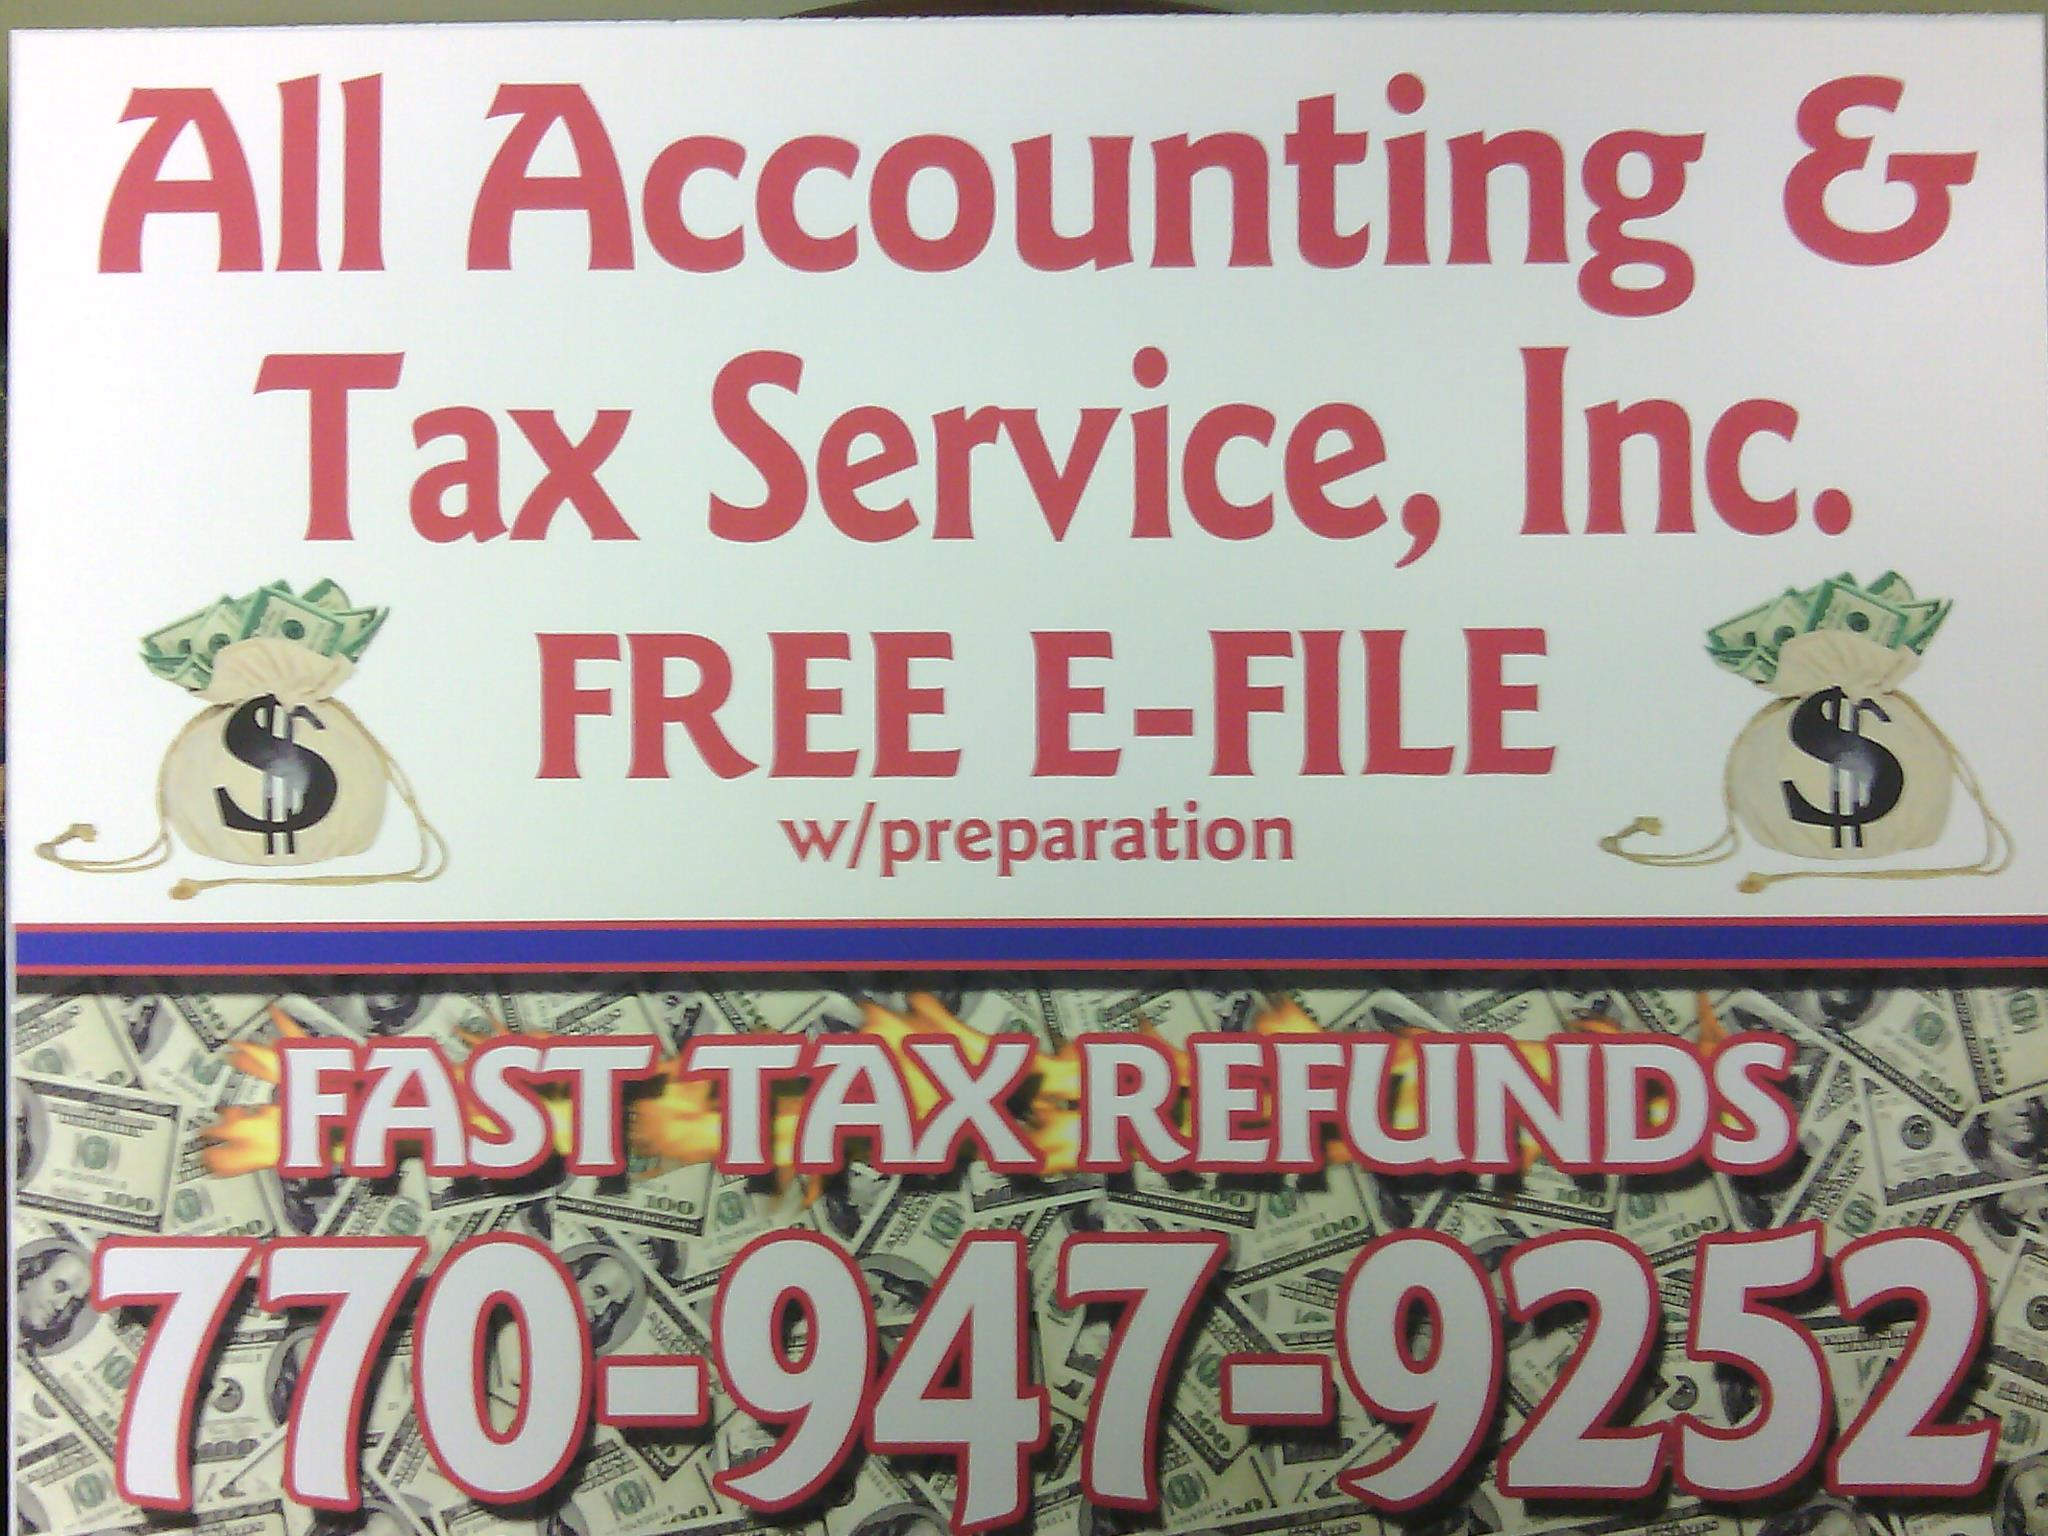 All Accounting & Tax Services